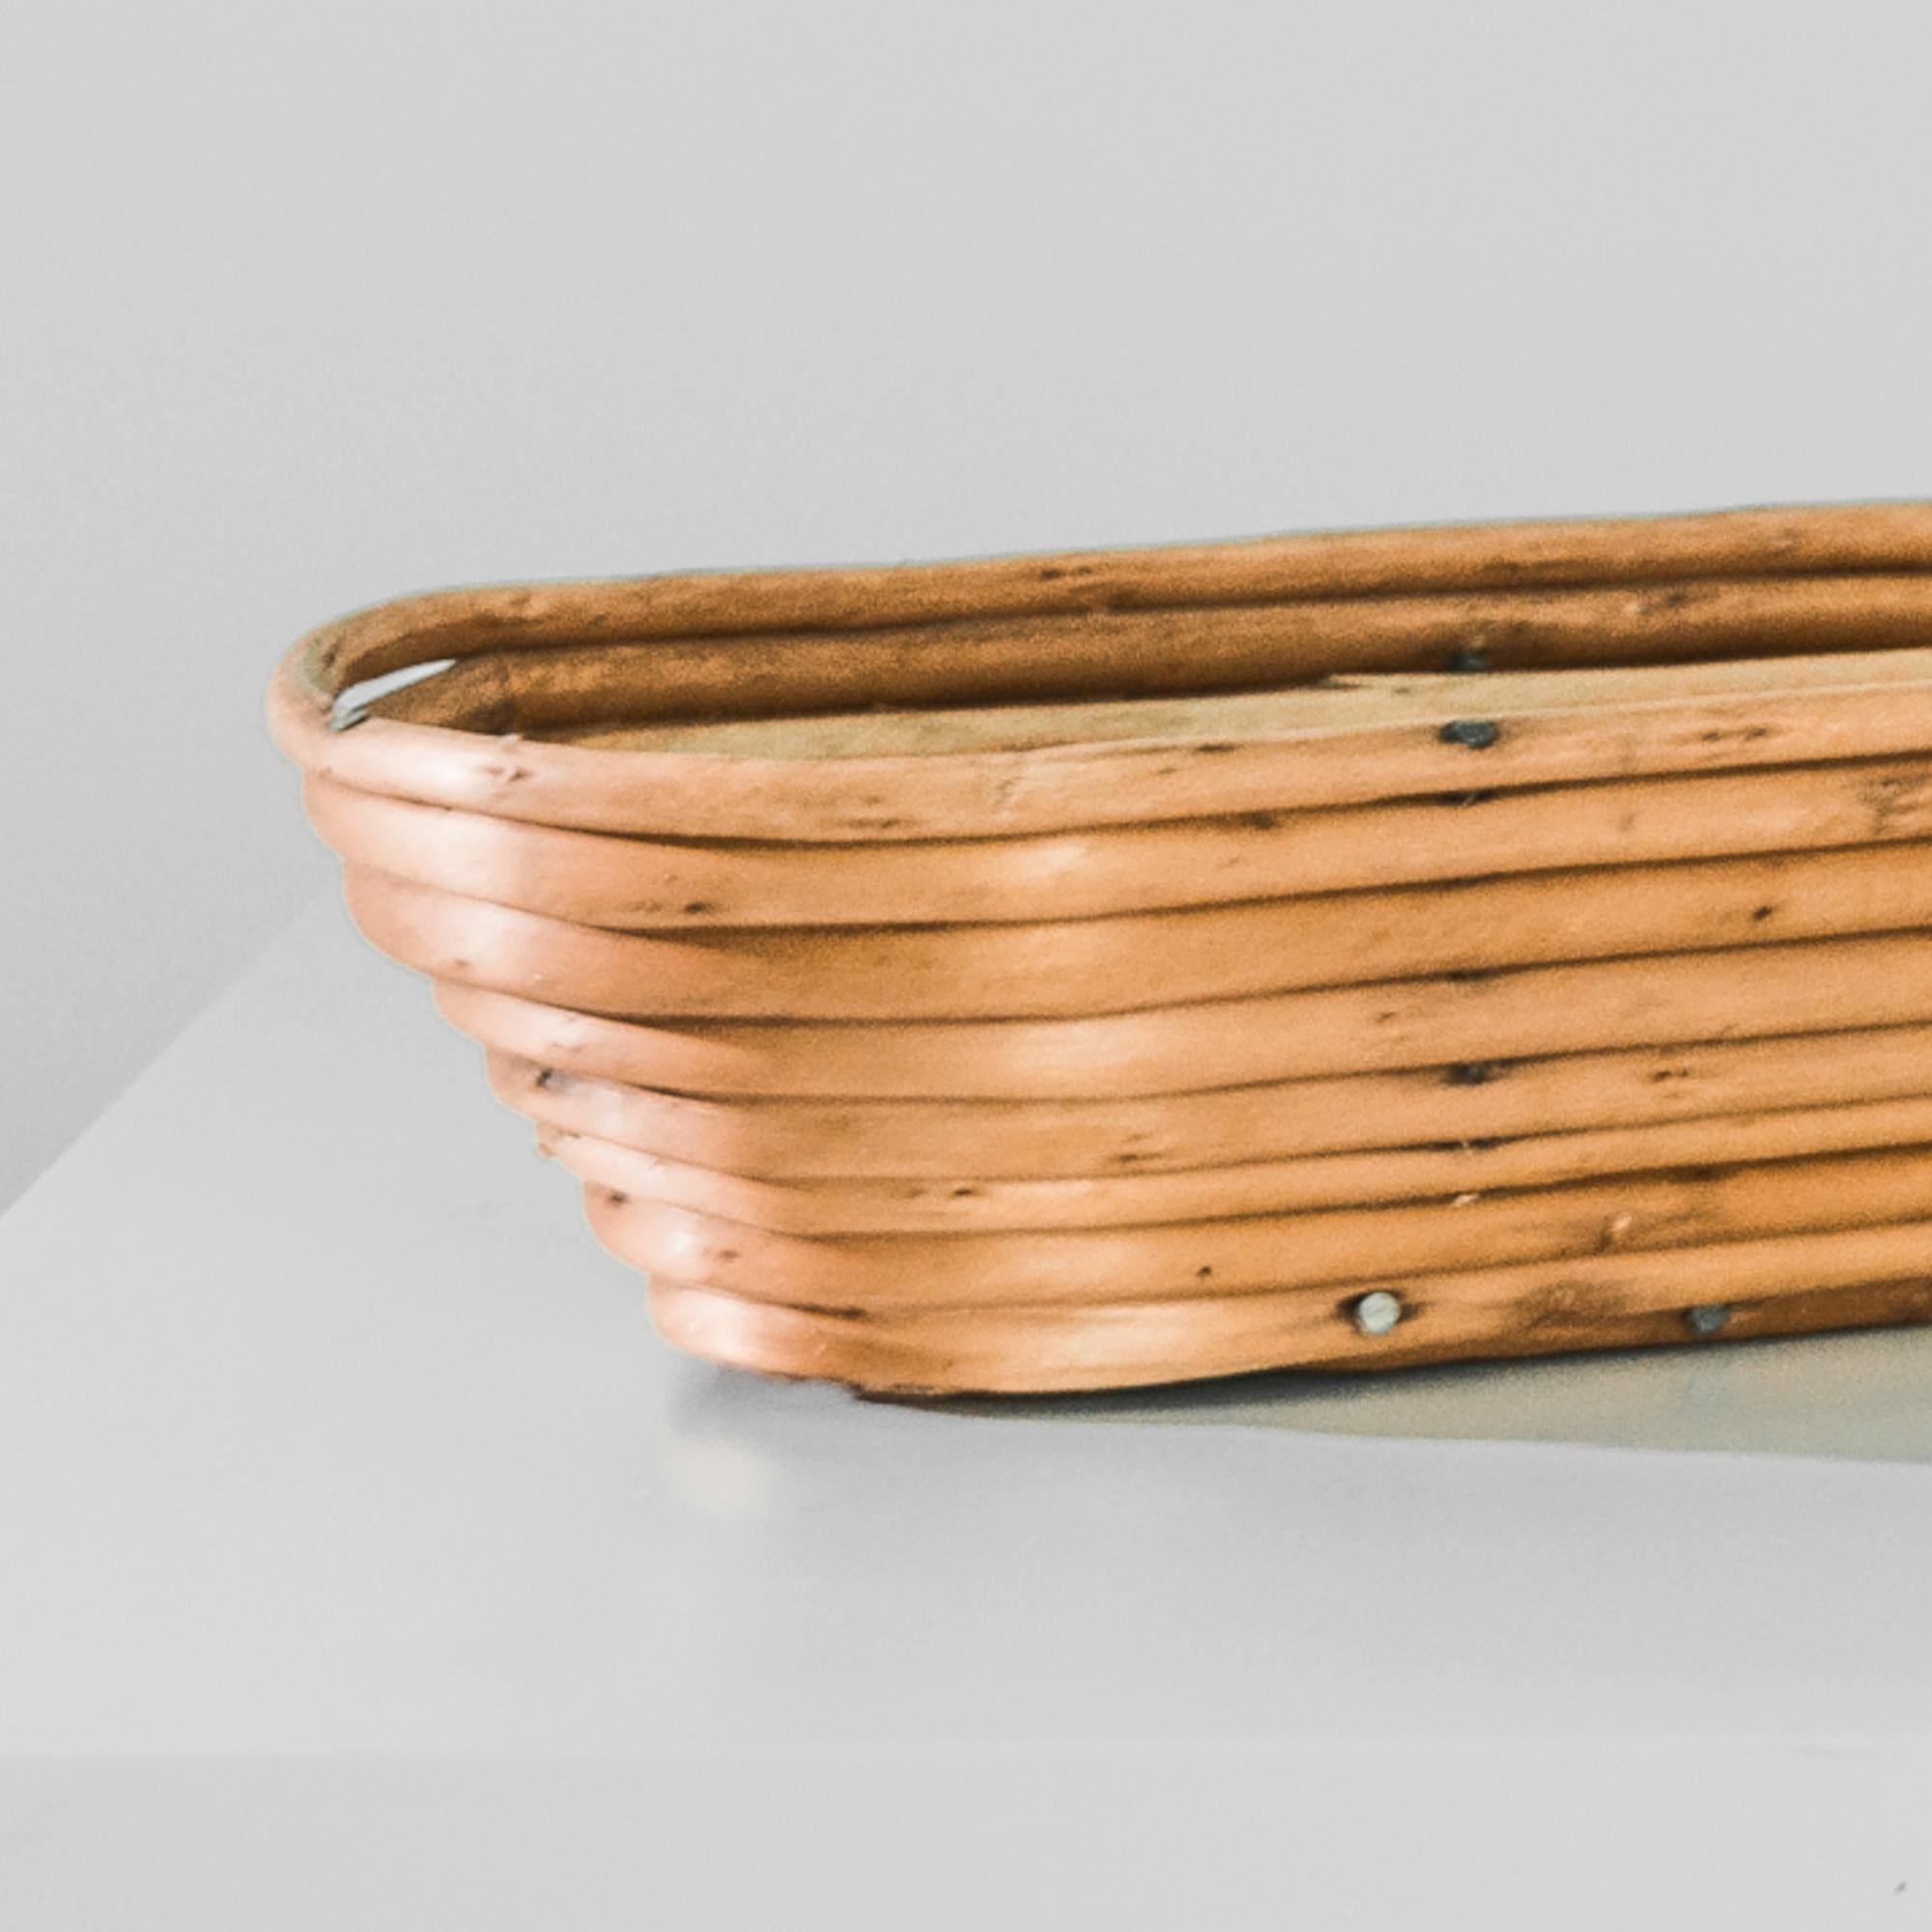 Retired from an old world bakery, this rattan basket was sourced in Czech Republic. Dated to approximately 1900, this essential tool from a bustling early 20th century bakery, displays the charms of its age. Three inches tall and one foot wide, this